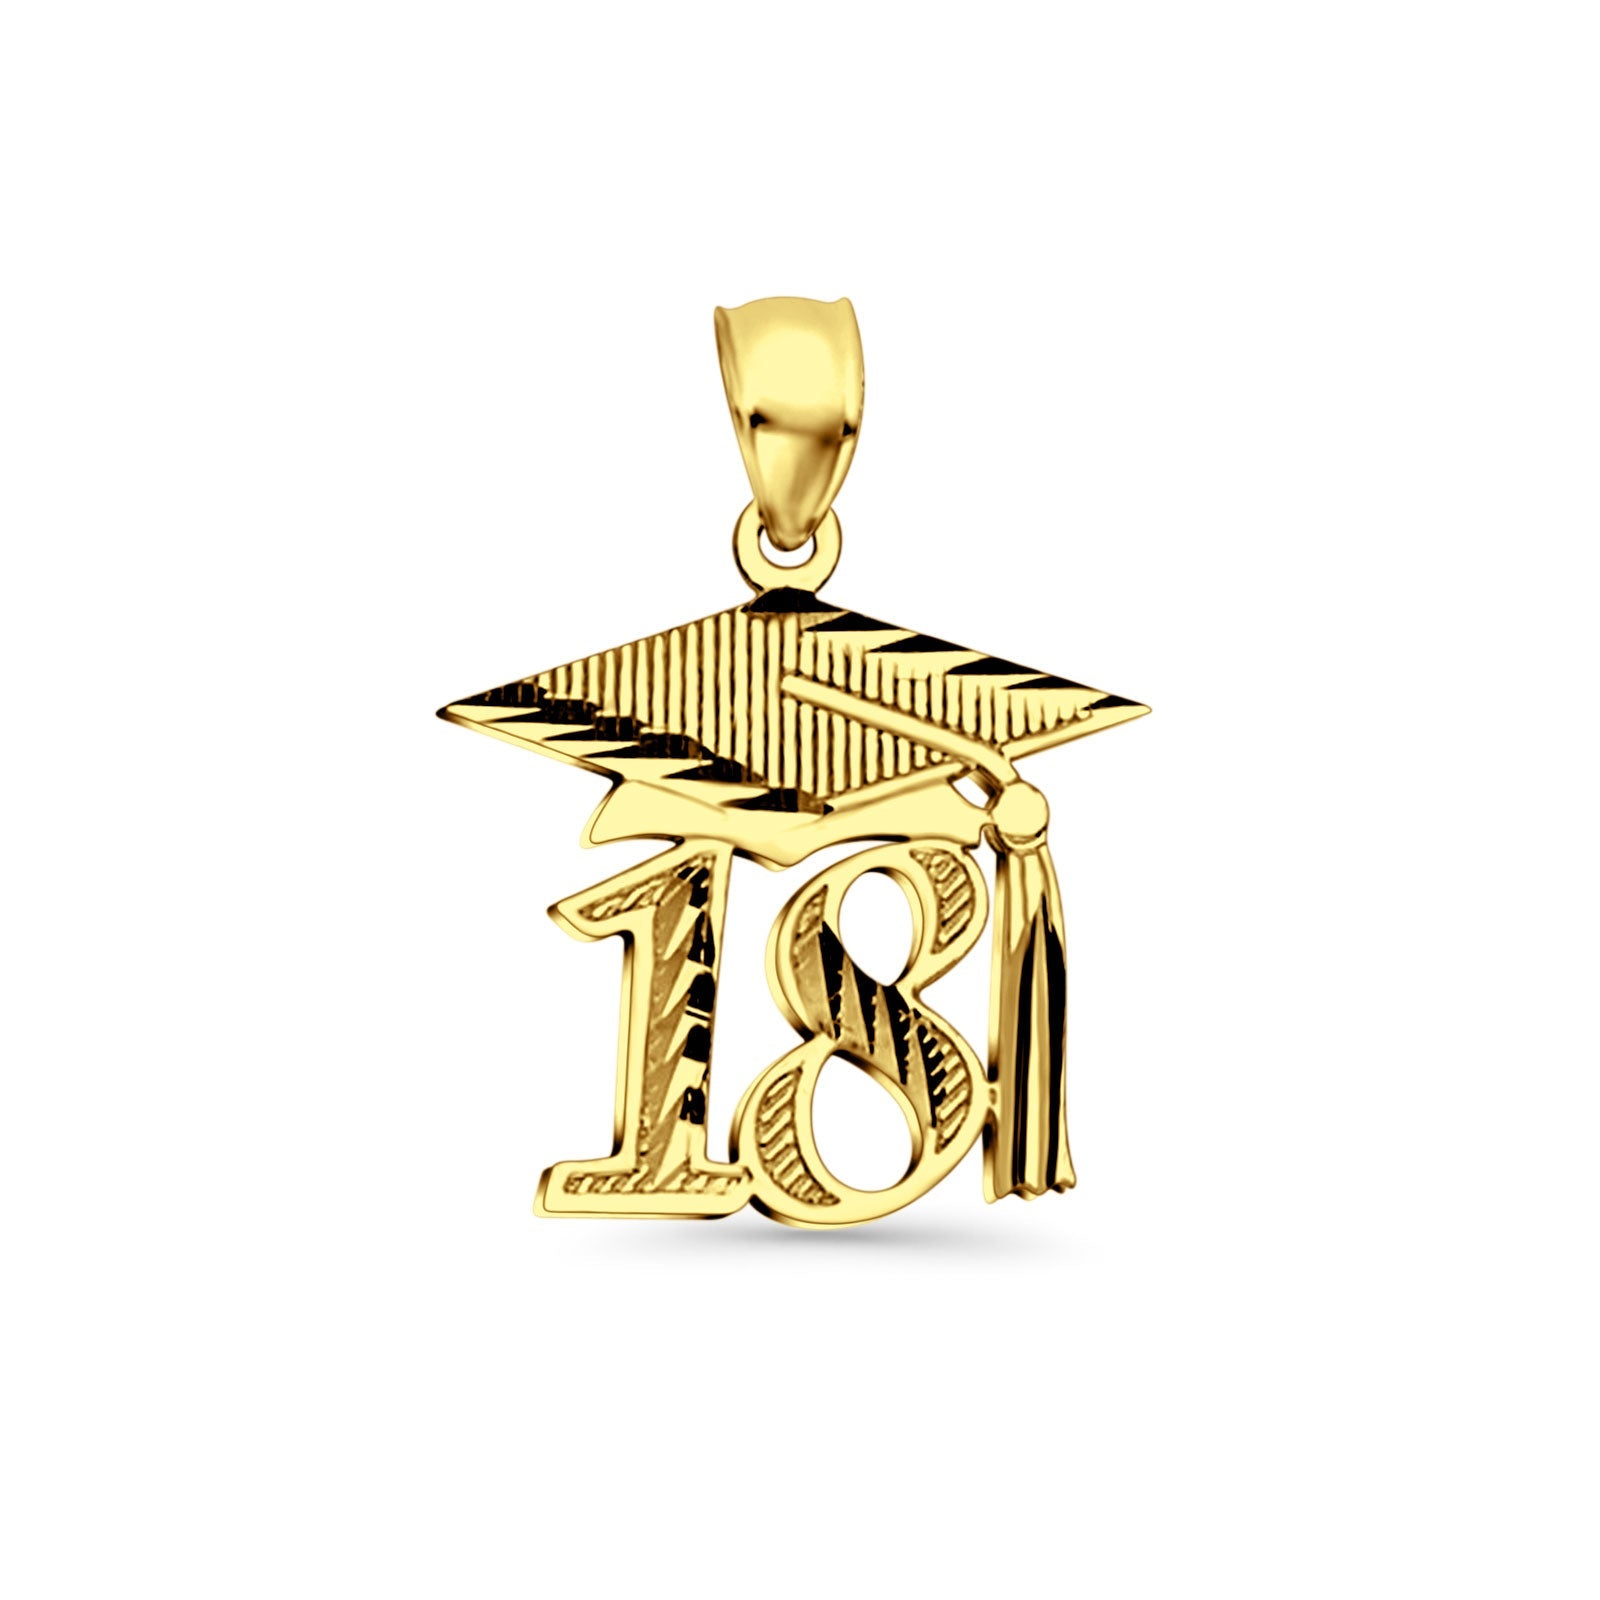 14K Yellow Gold Graduation Pendant 25mmX18mm With 16 Inch To 24 Inch 0.6MM Width Box Chain Necklace